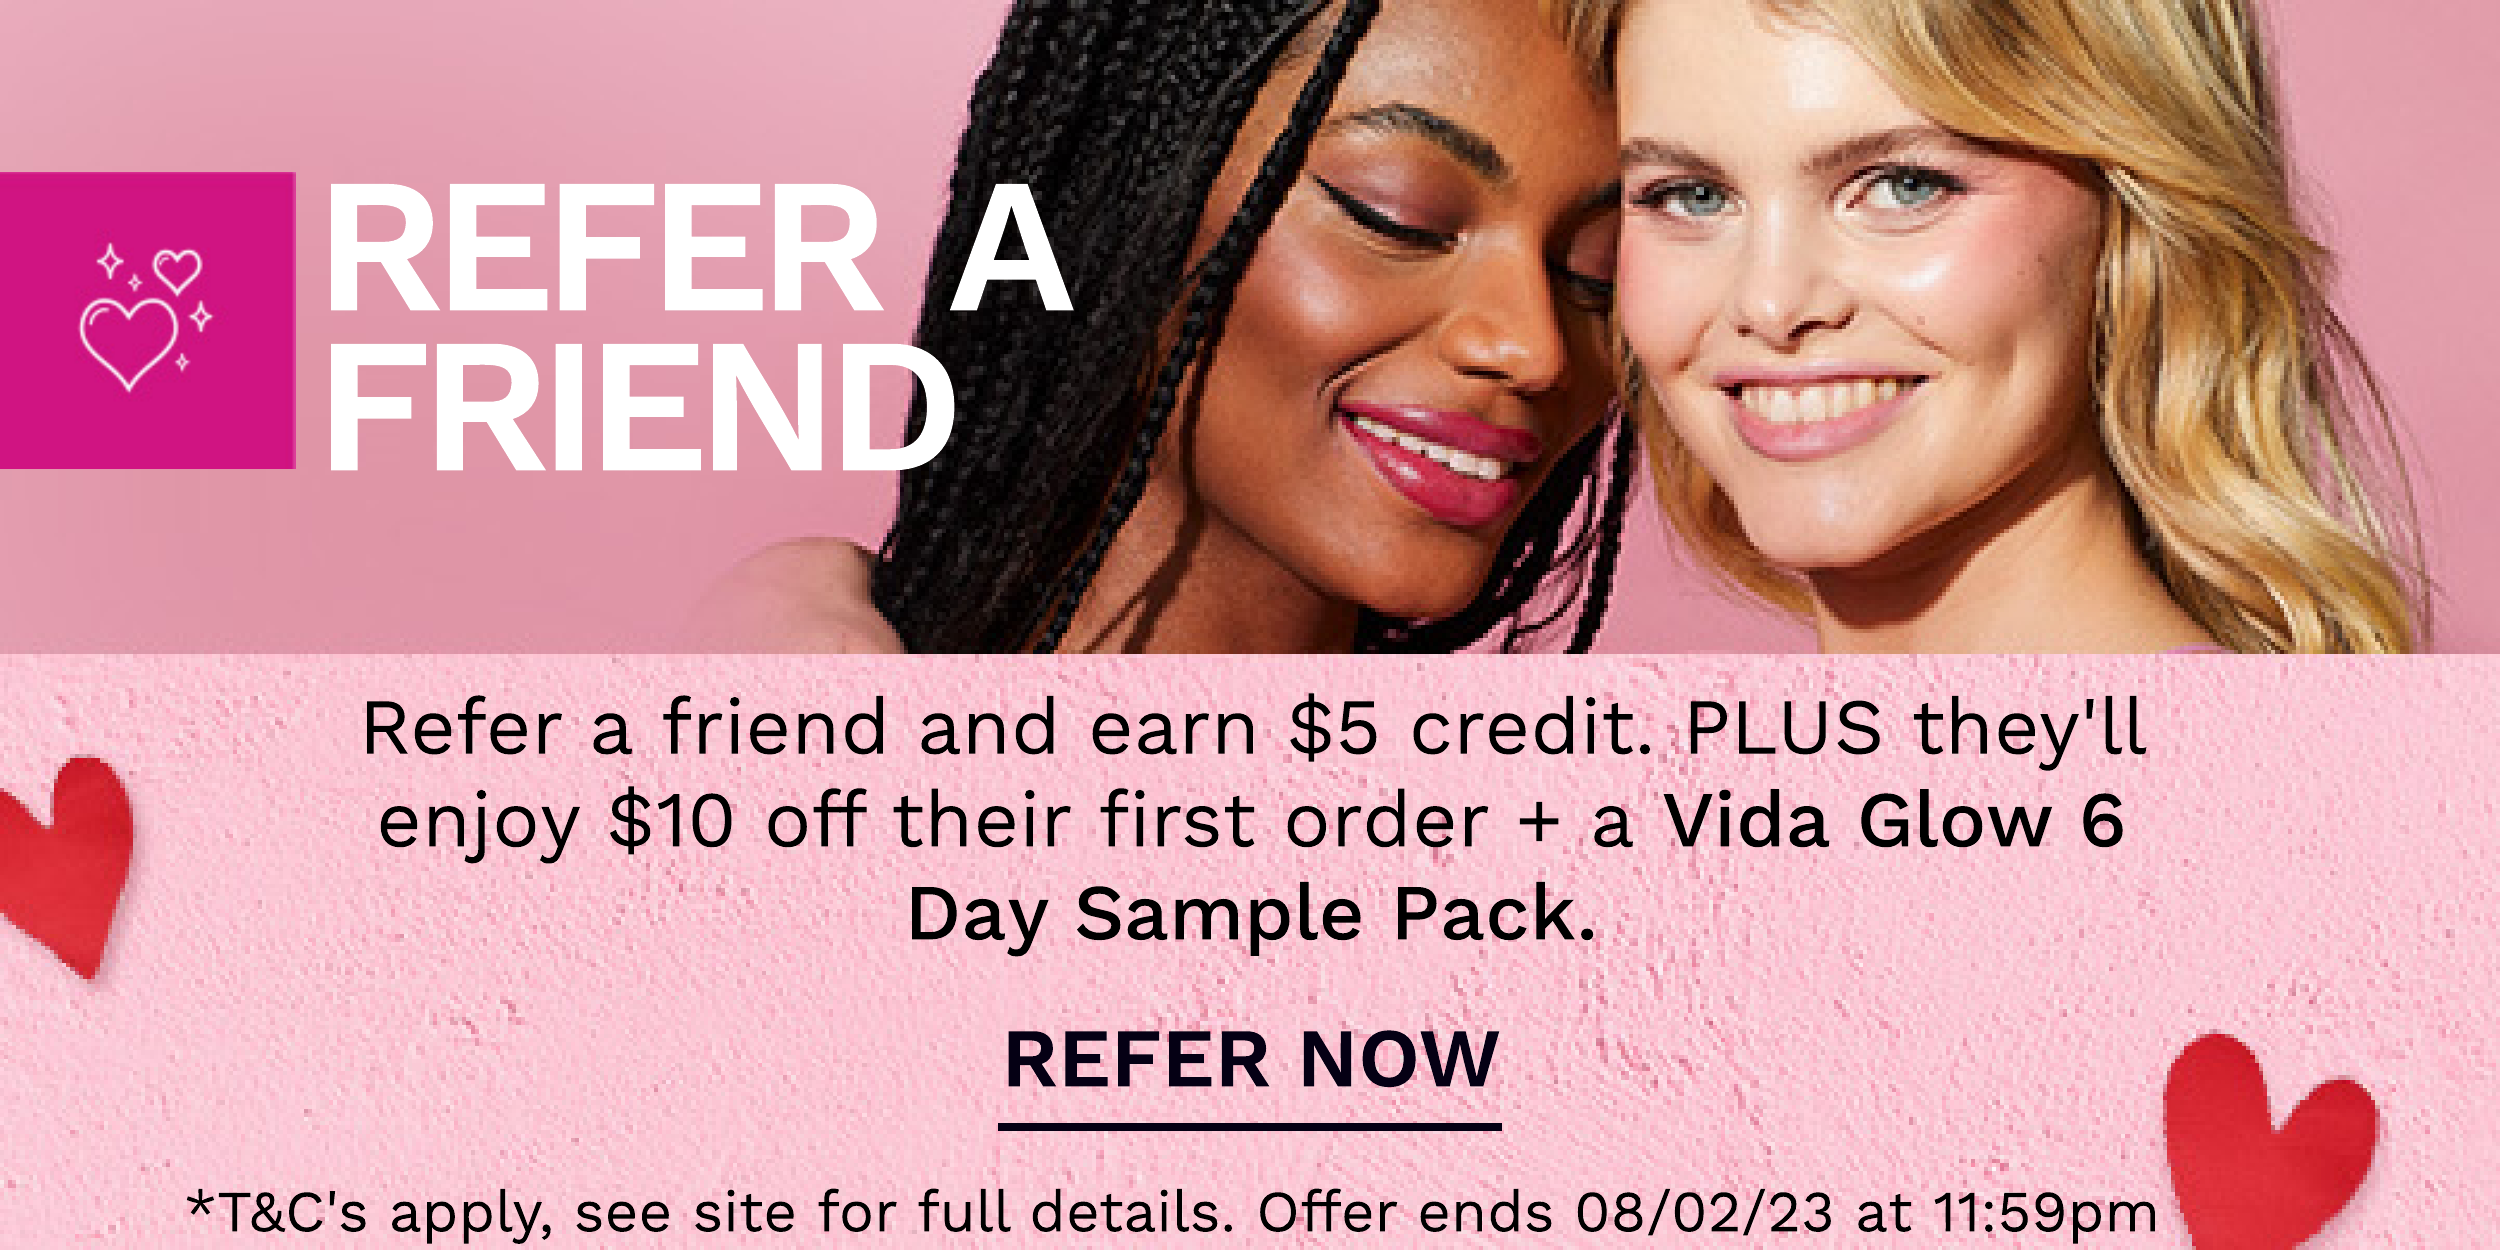  Refer a friend and earn $5 credit. PLUS they'll enjoy $10 off their first order a Vida Glow 6 Day Sample Pack. REFER NOW *TC's apply, see site for full details. Offer ends 080223 at 11:59pm 